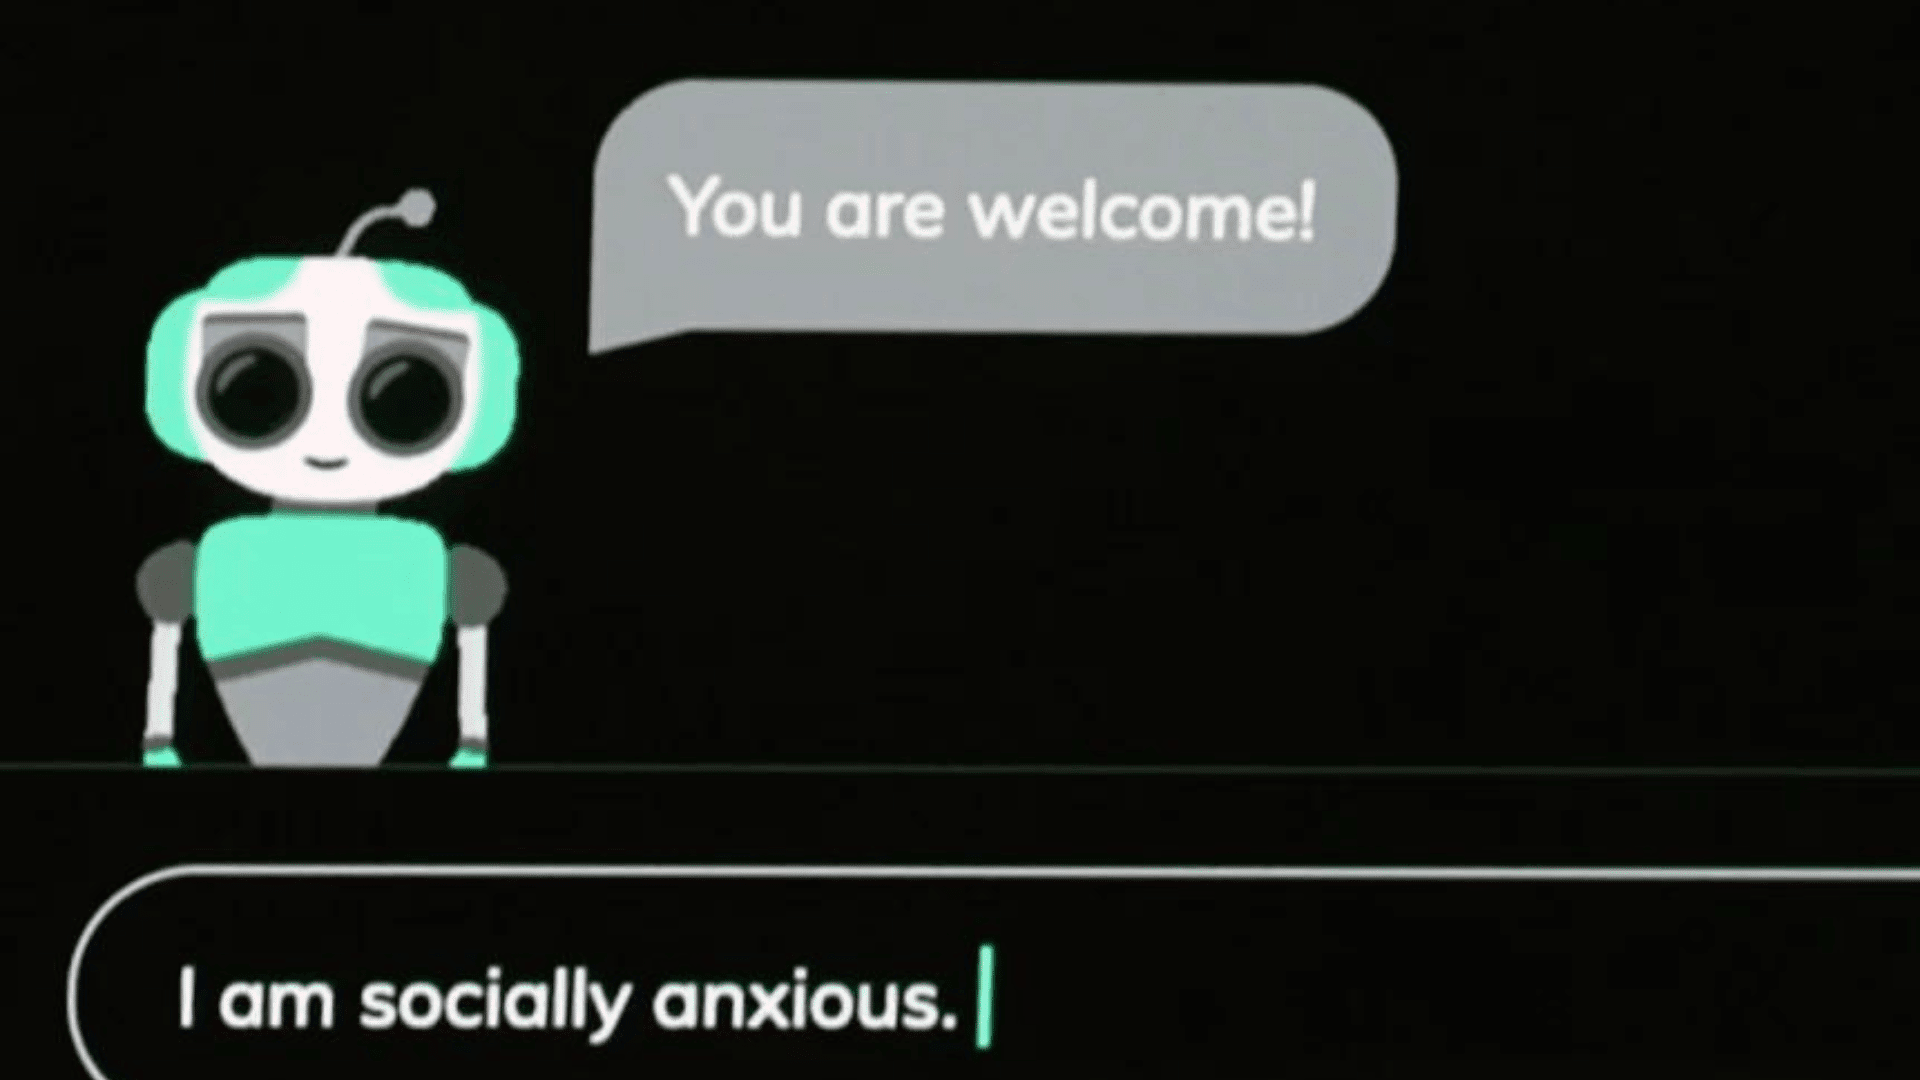 New AI Bot Used To Make Mental Health More Accessible